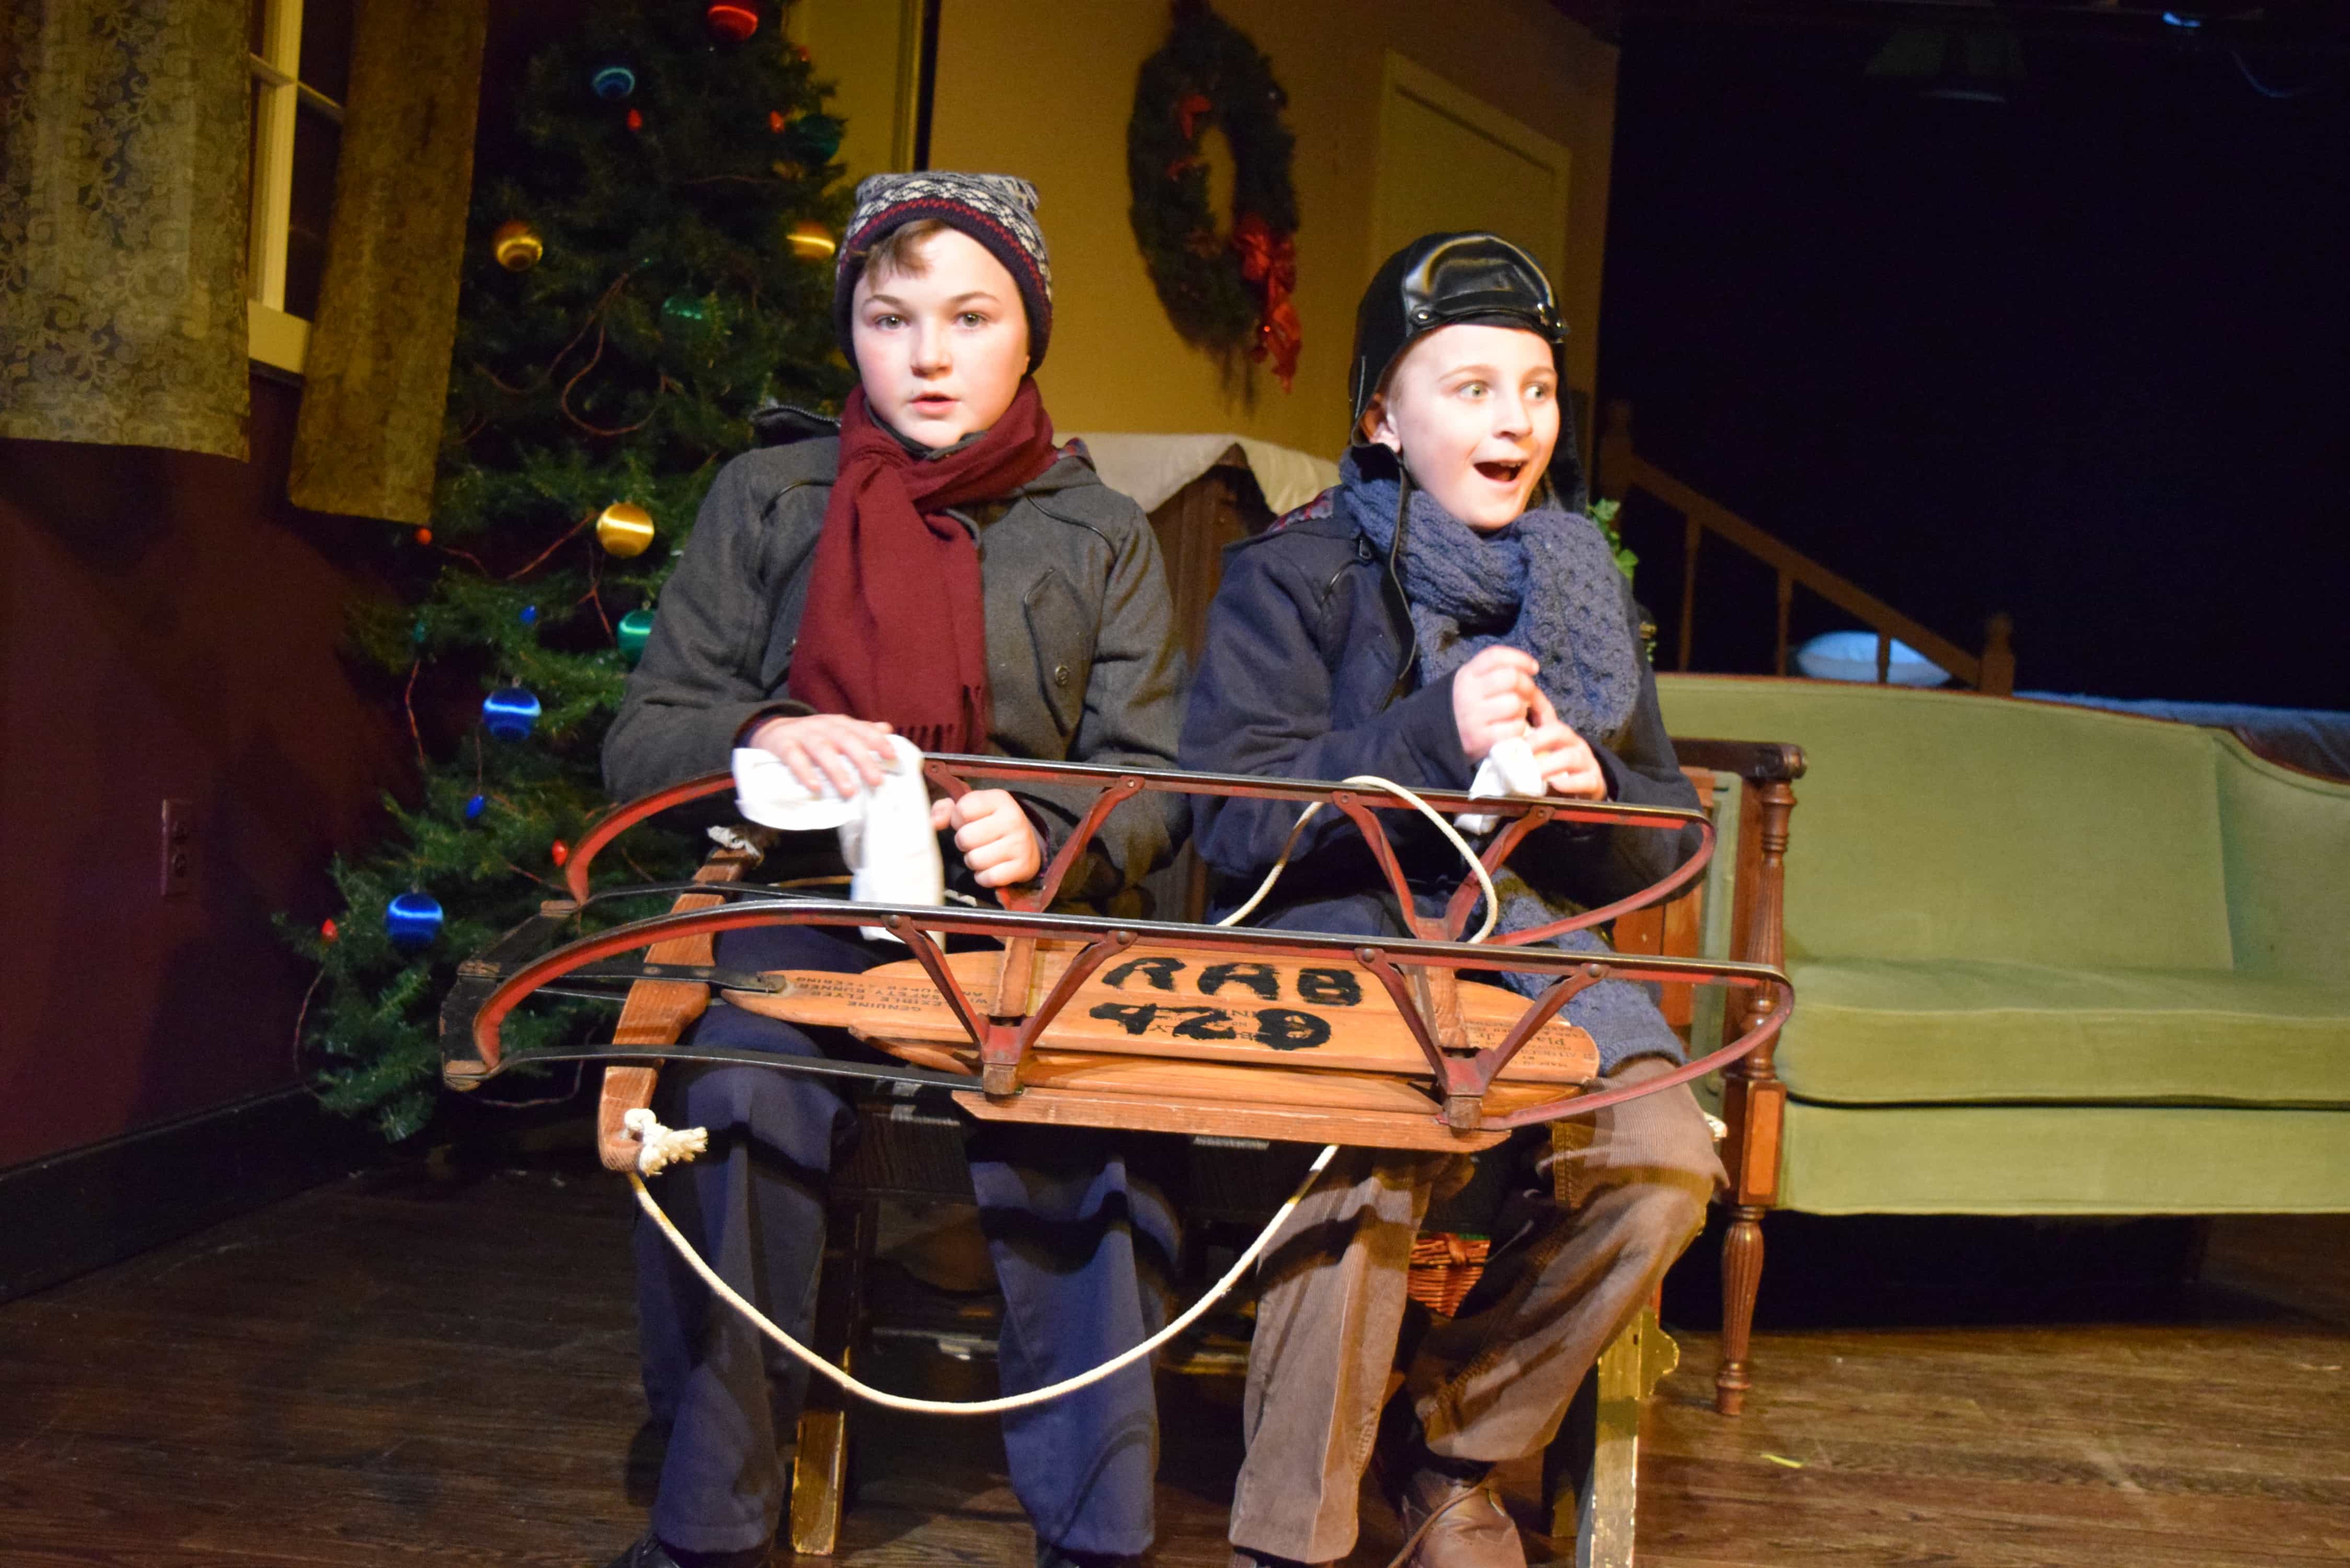 A Christmas Story, presented by Rockville Little Theatre, plays through December 9 at the Arts Barn in Gaithersburg. Photo by Aaron Skolnik.